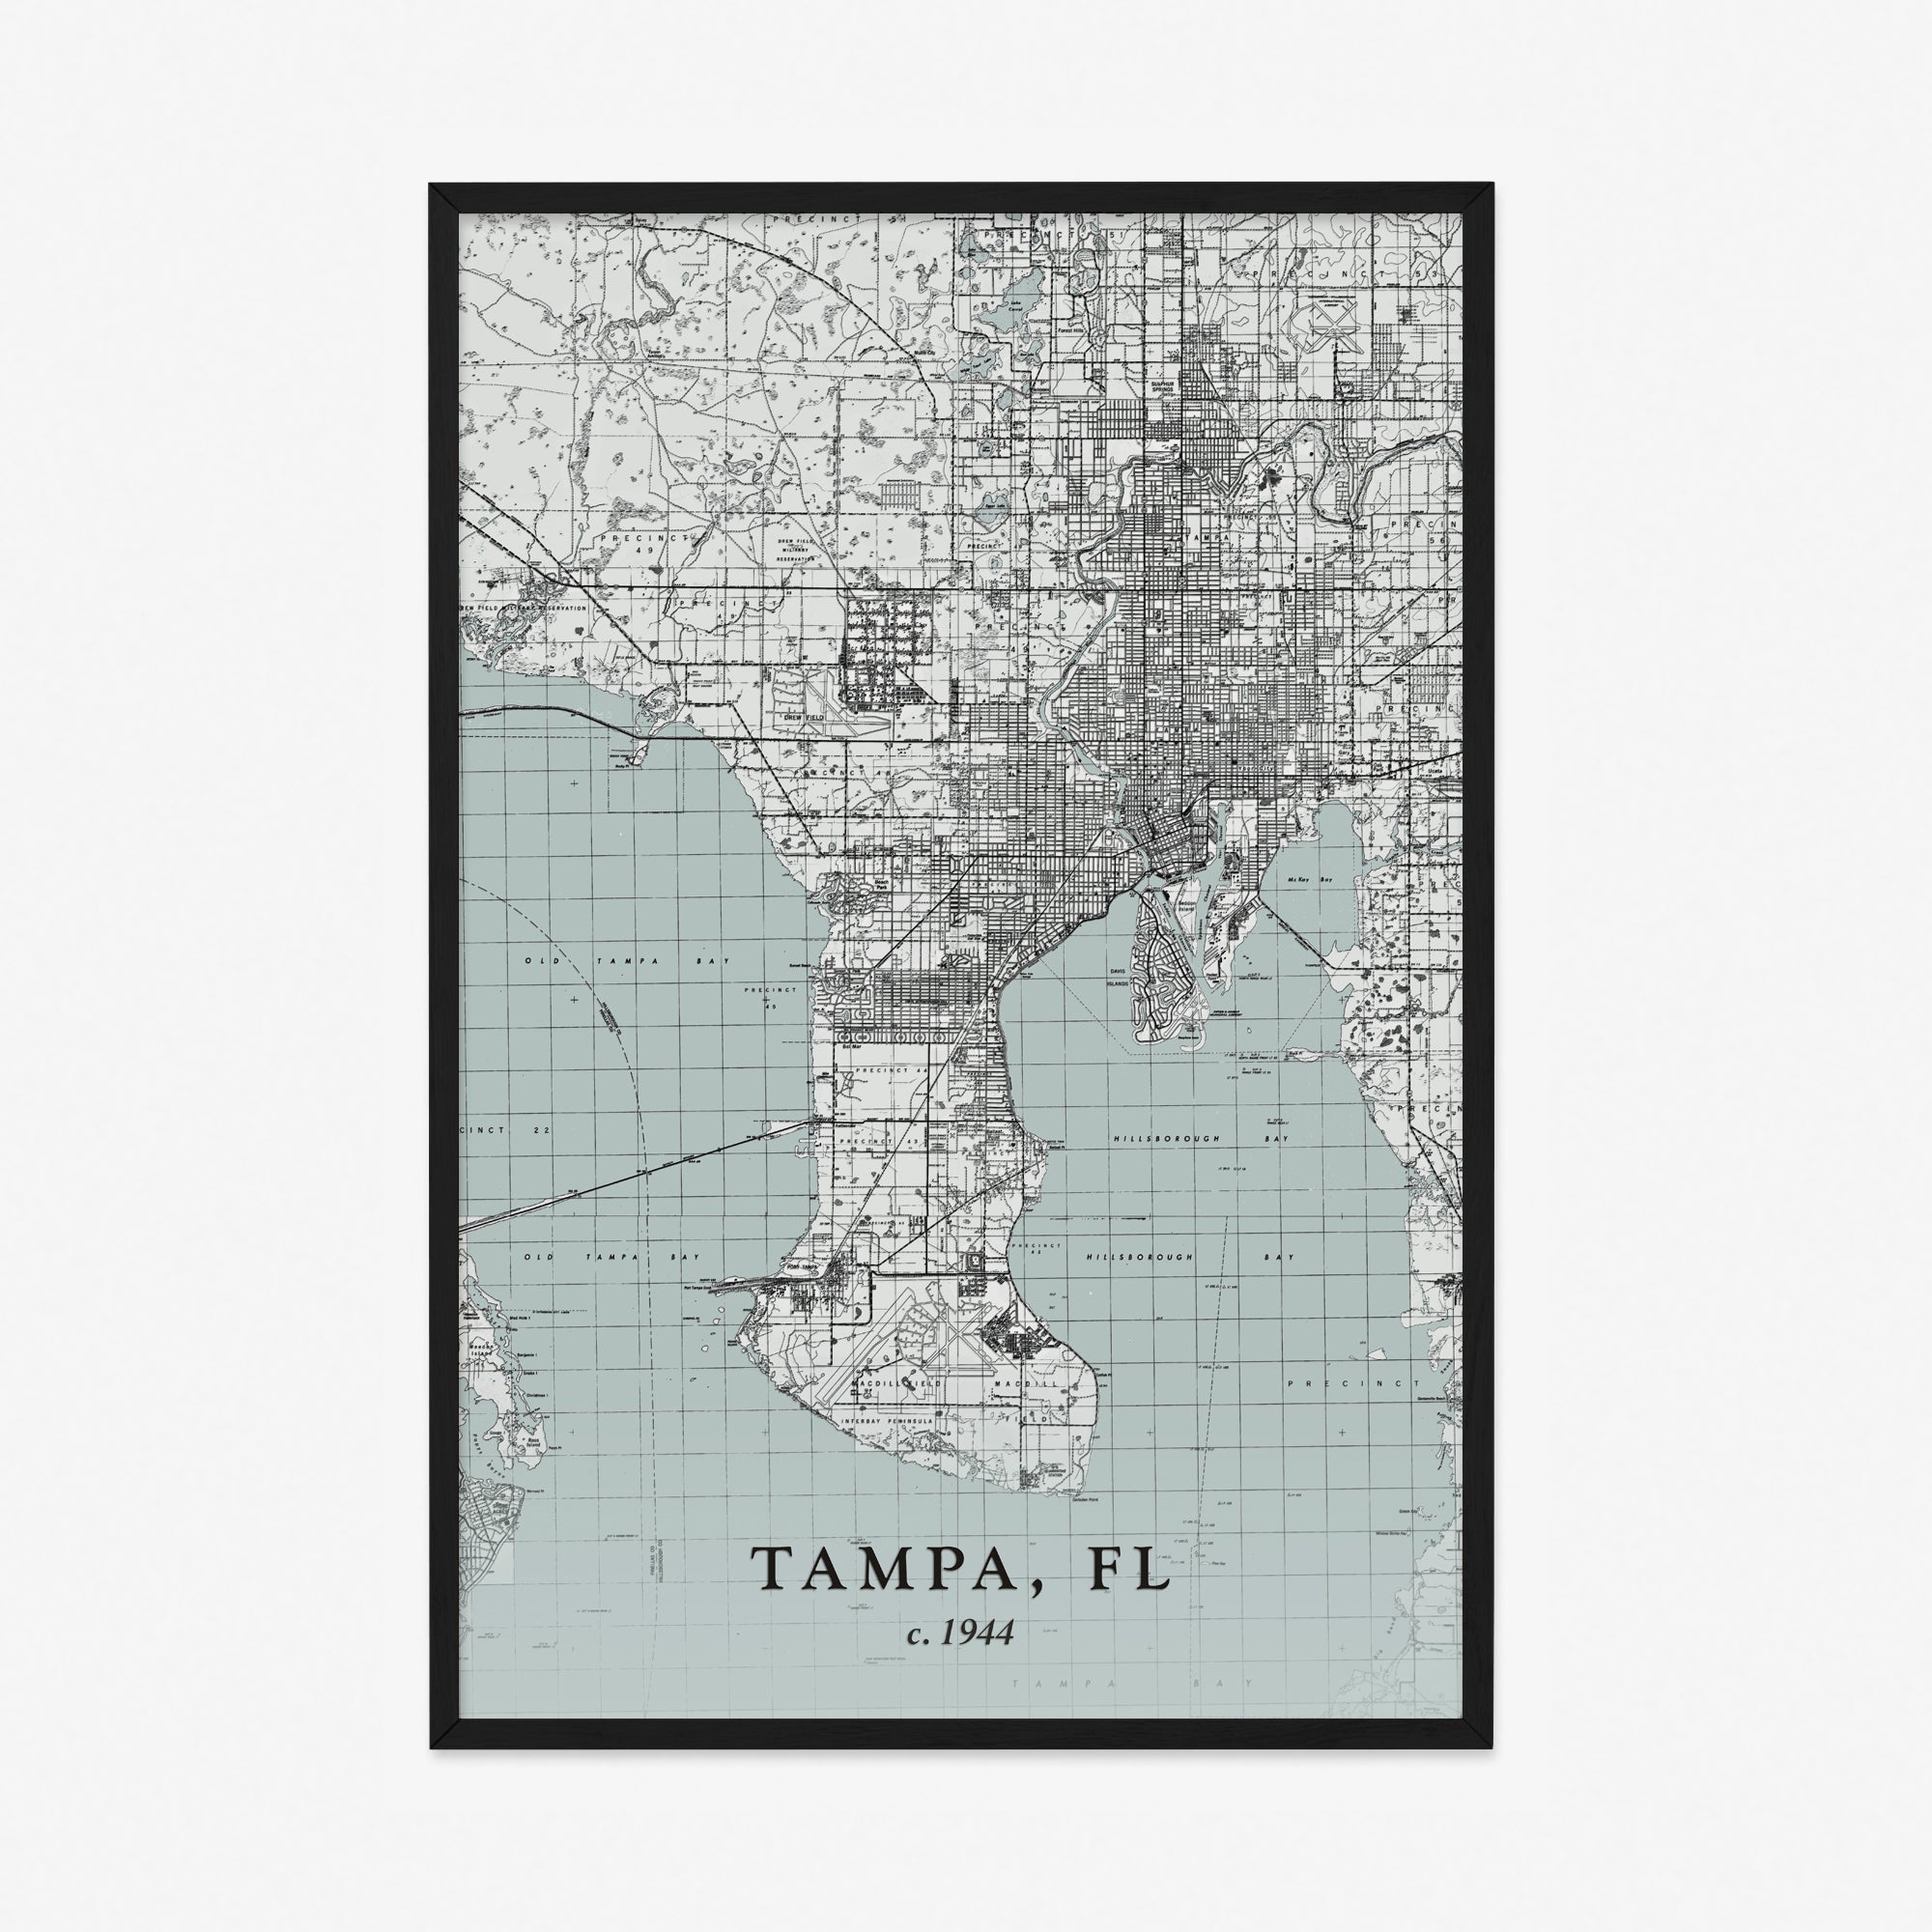 Tampa, FL - 1944 Topographic Map